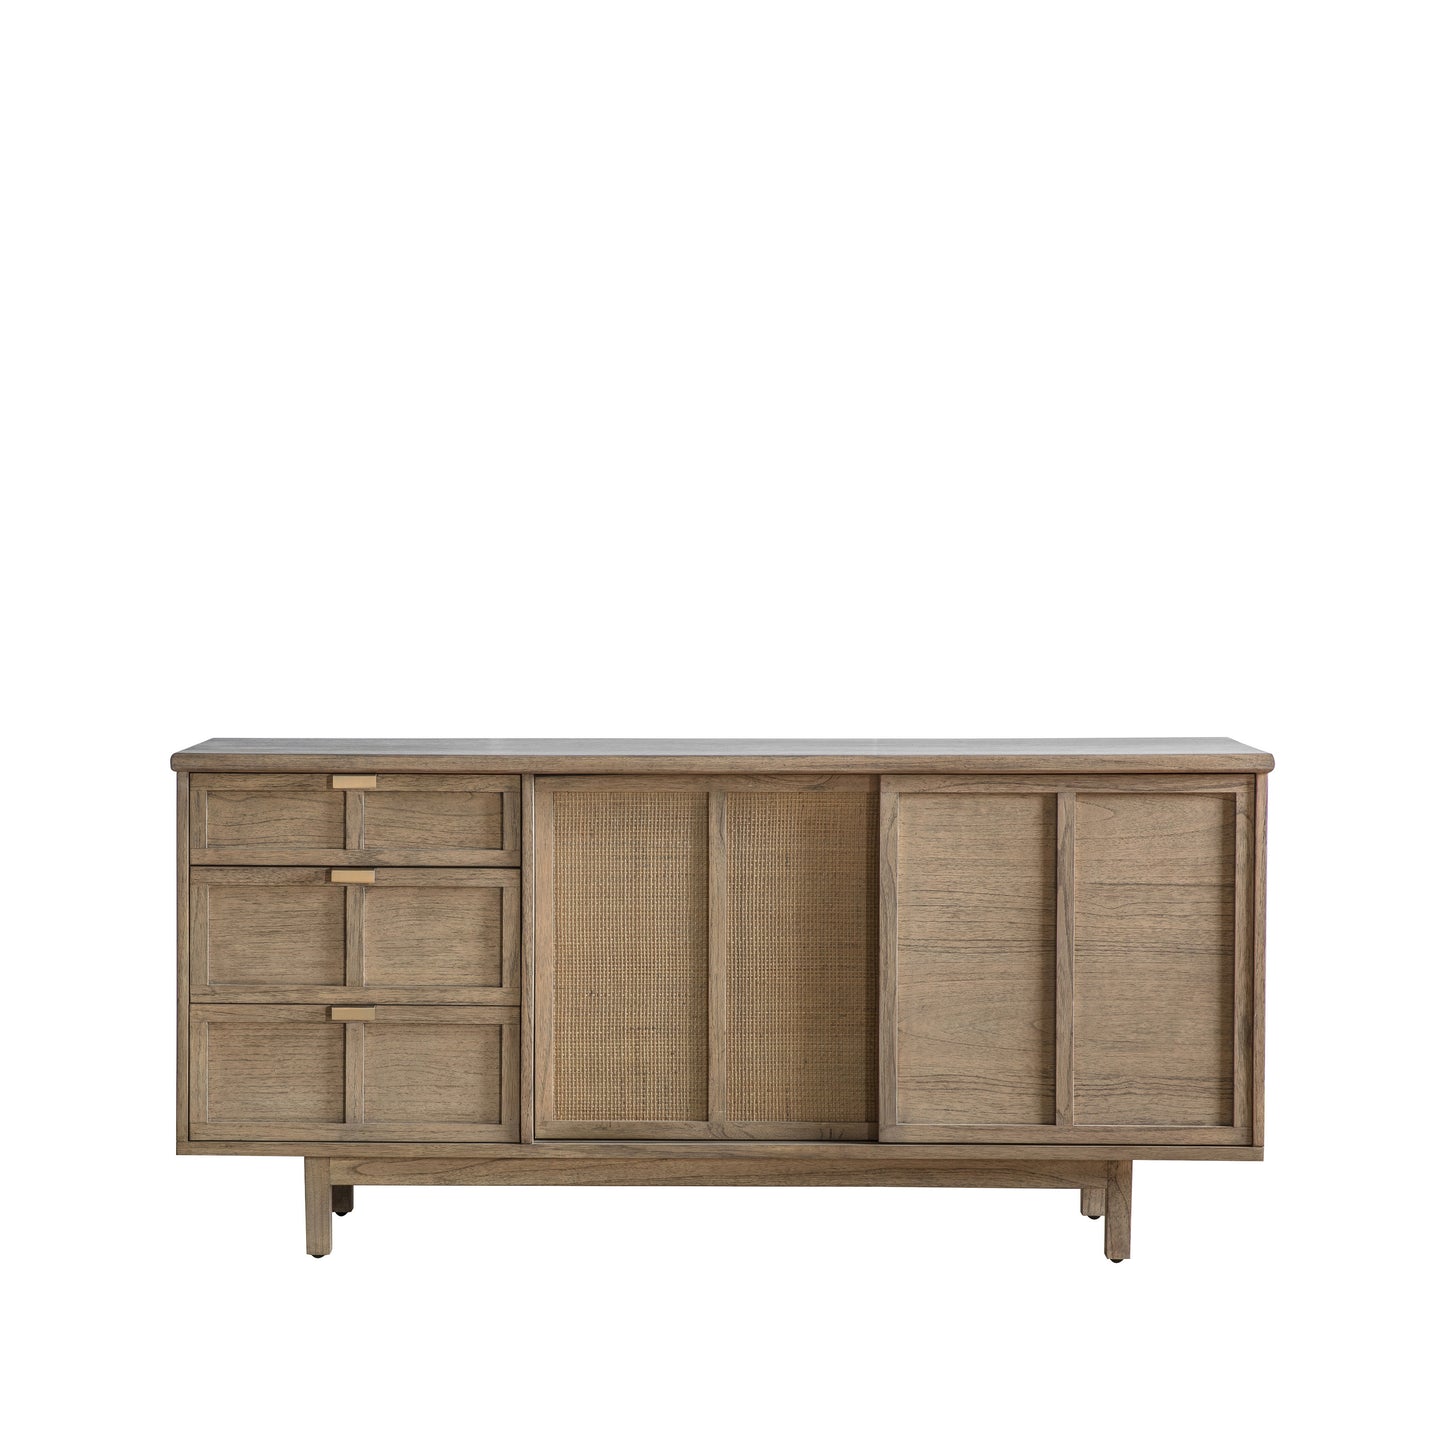 Load image into Gallery viewer, The Kikiathome.co.uk Alvington 3 Drawer 2 Door Sideboard 1500x450x700mm is a wooden piece of home furniture with two drawers.
